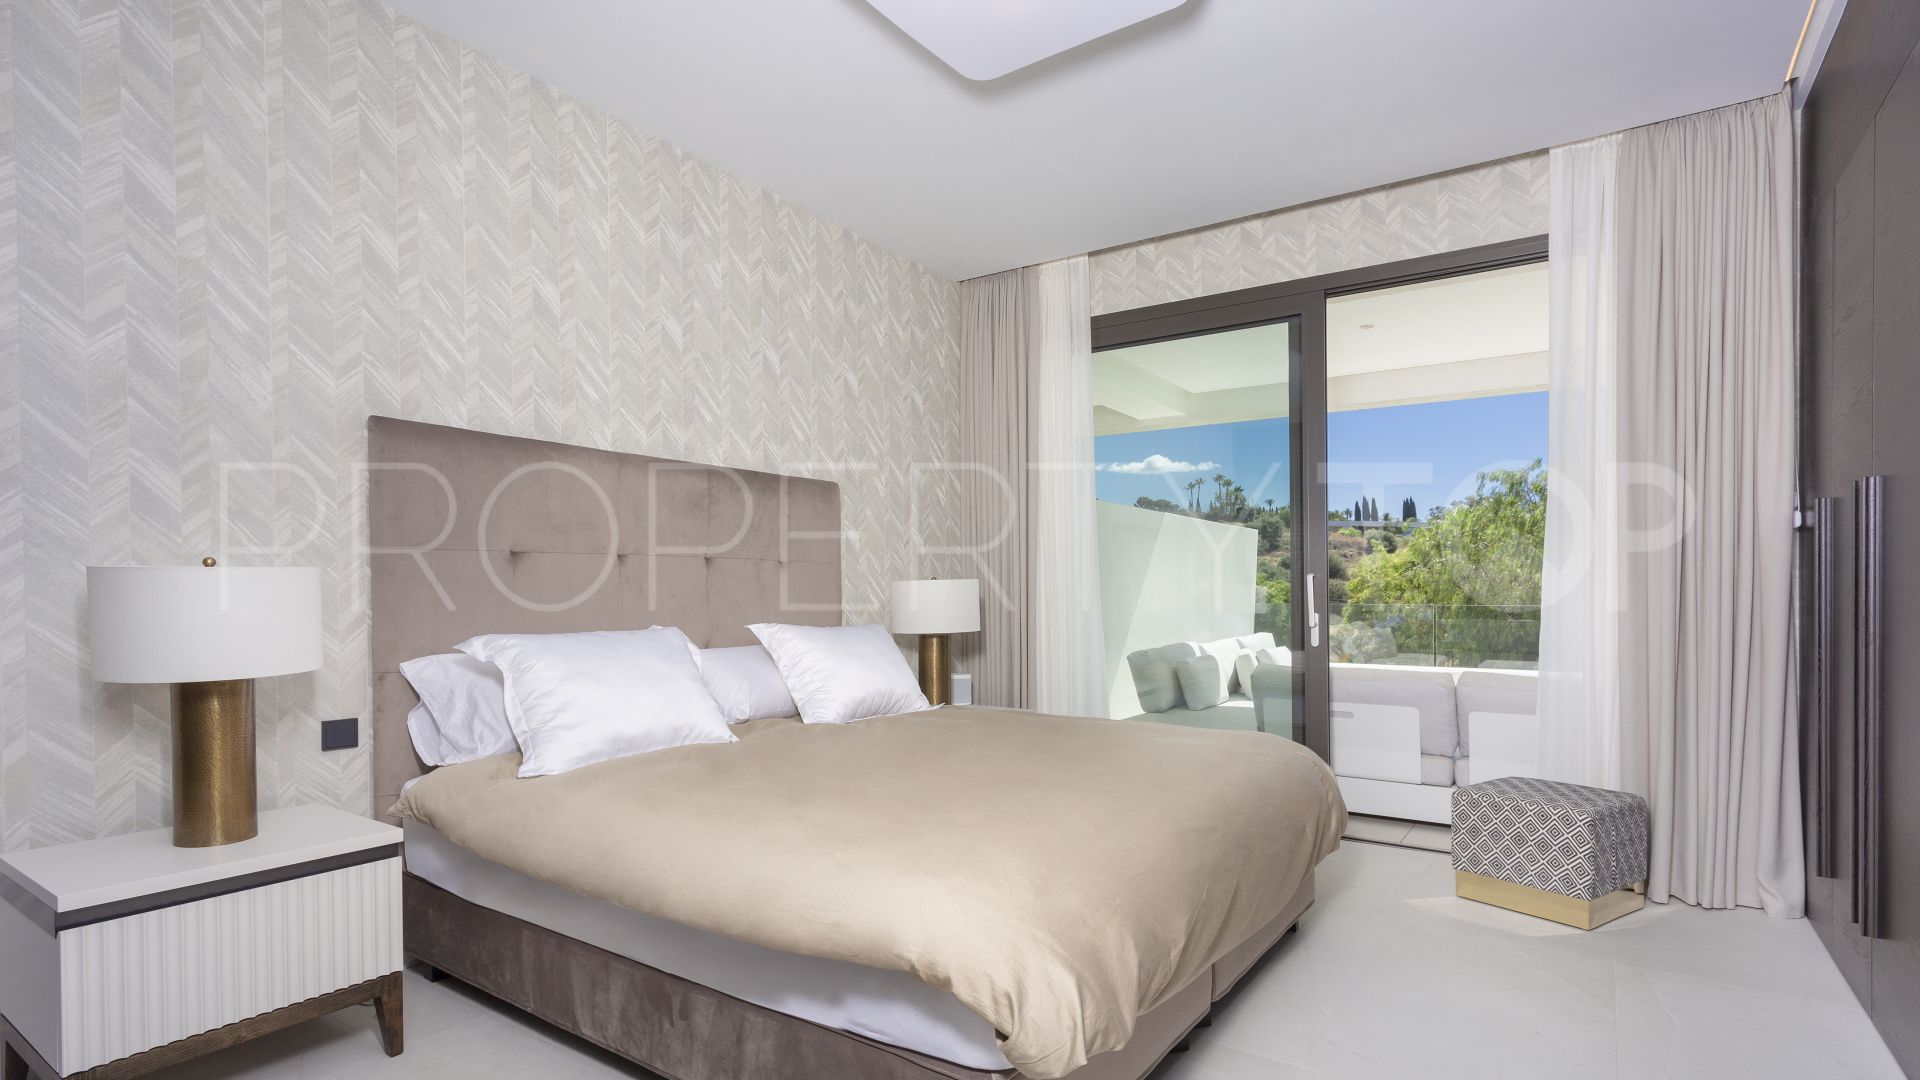 4 bedrooms duplex penthouse for sale in Epic Marbella